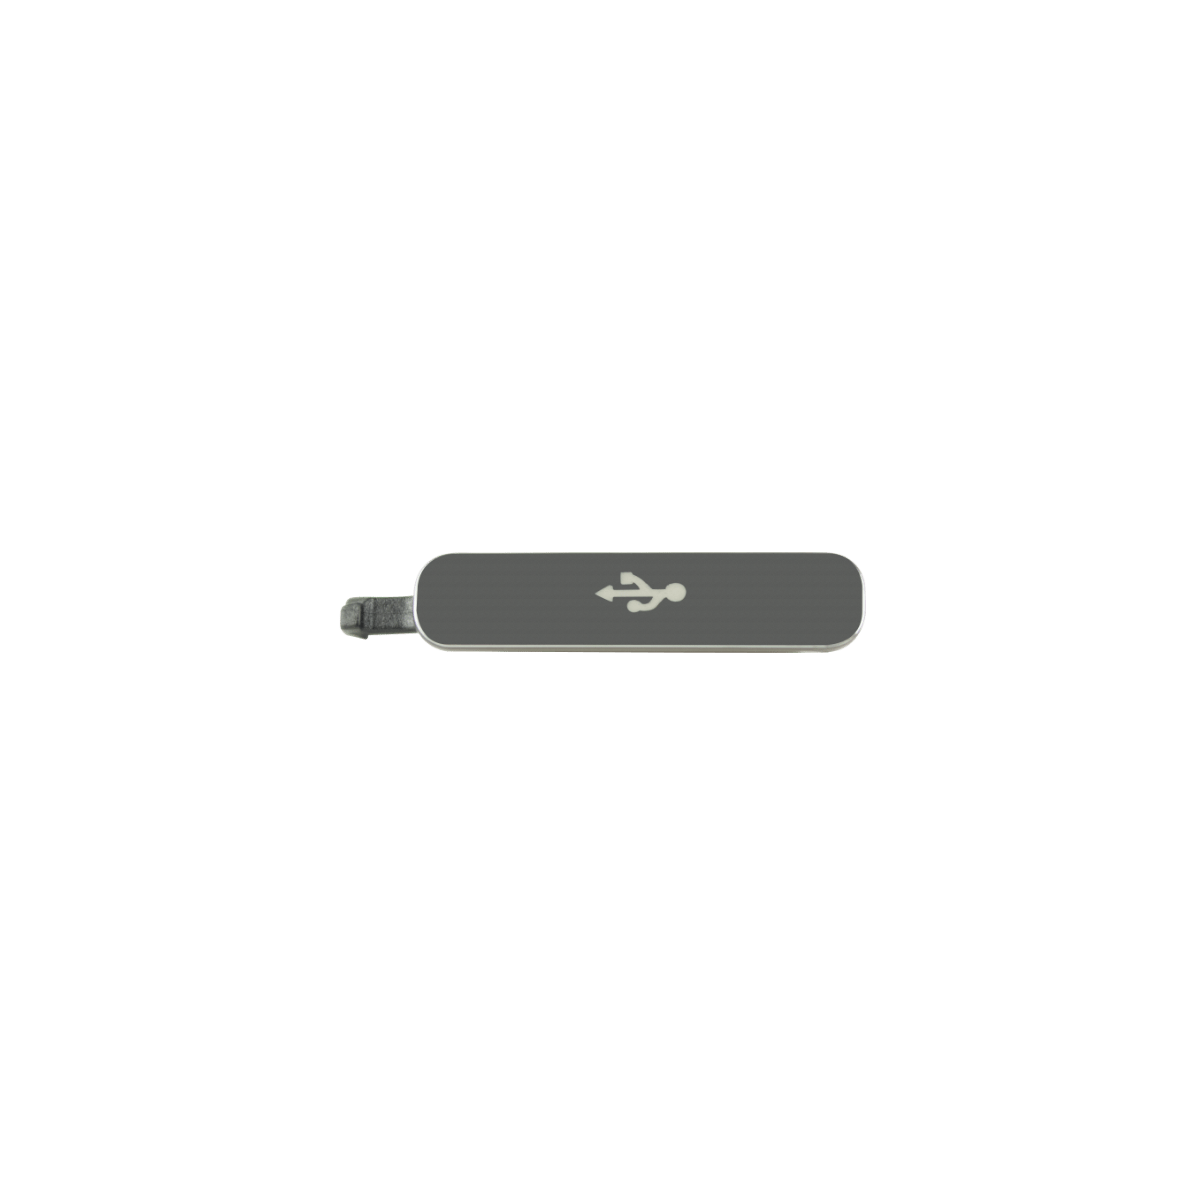 Samsung Galaxy S5 Charging Port Cover Replacement